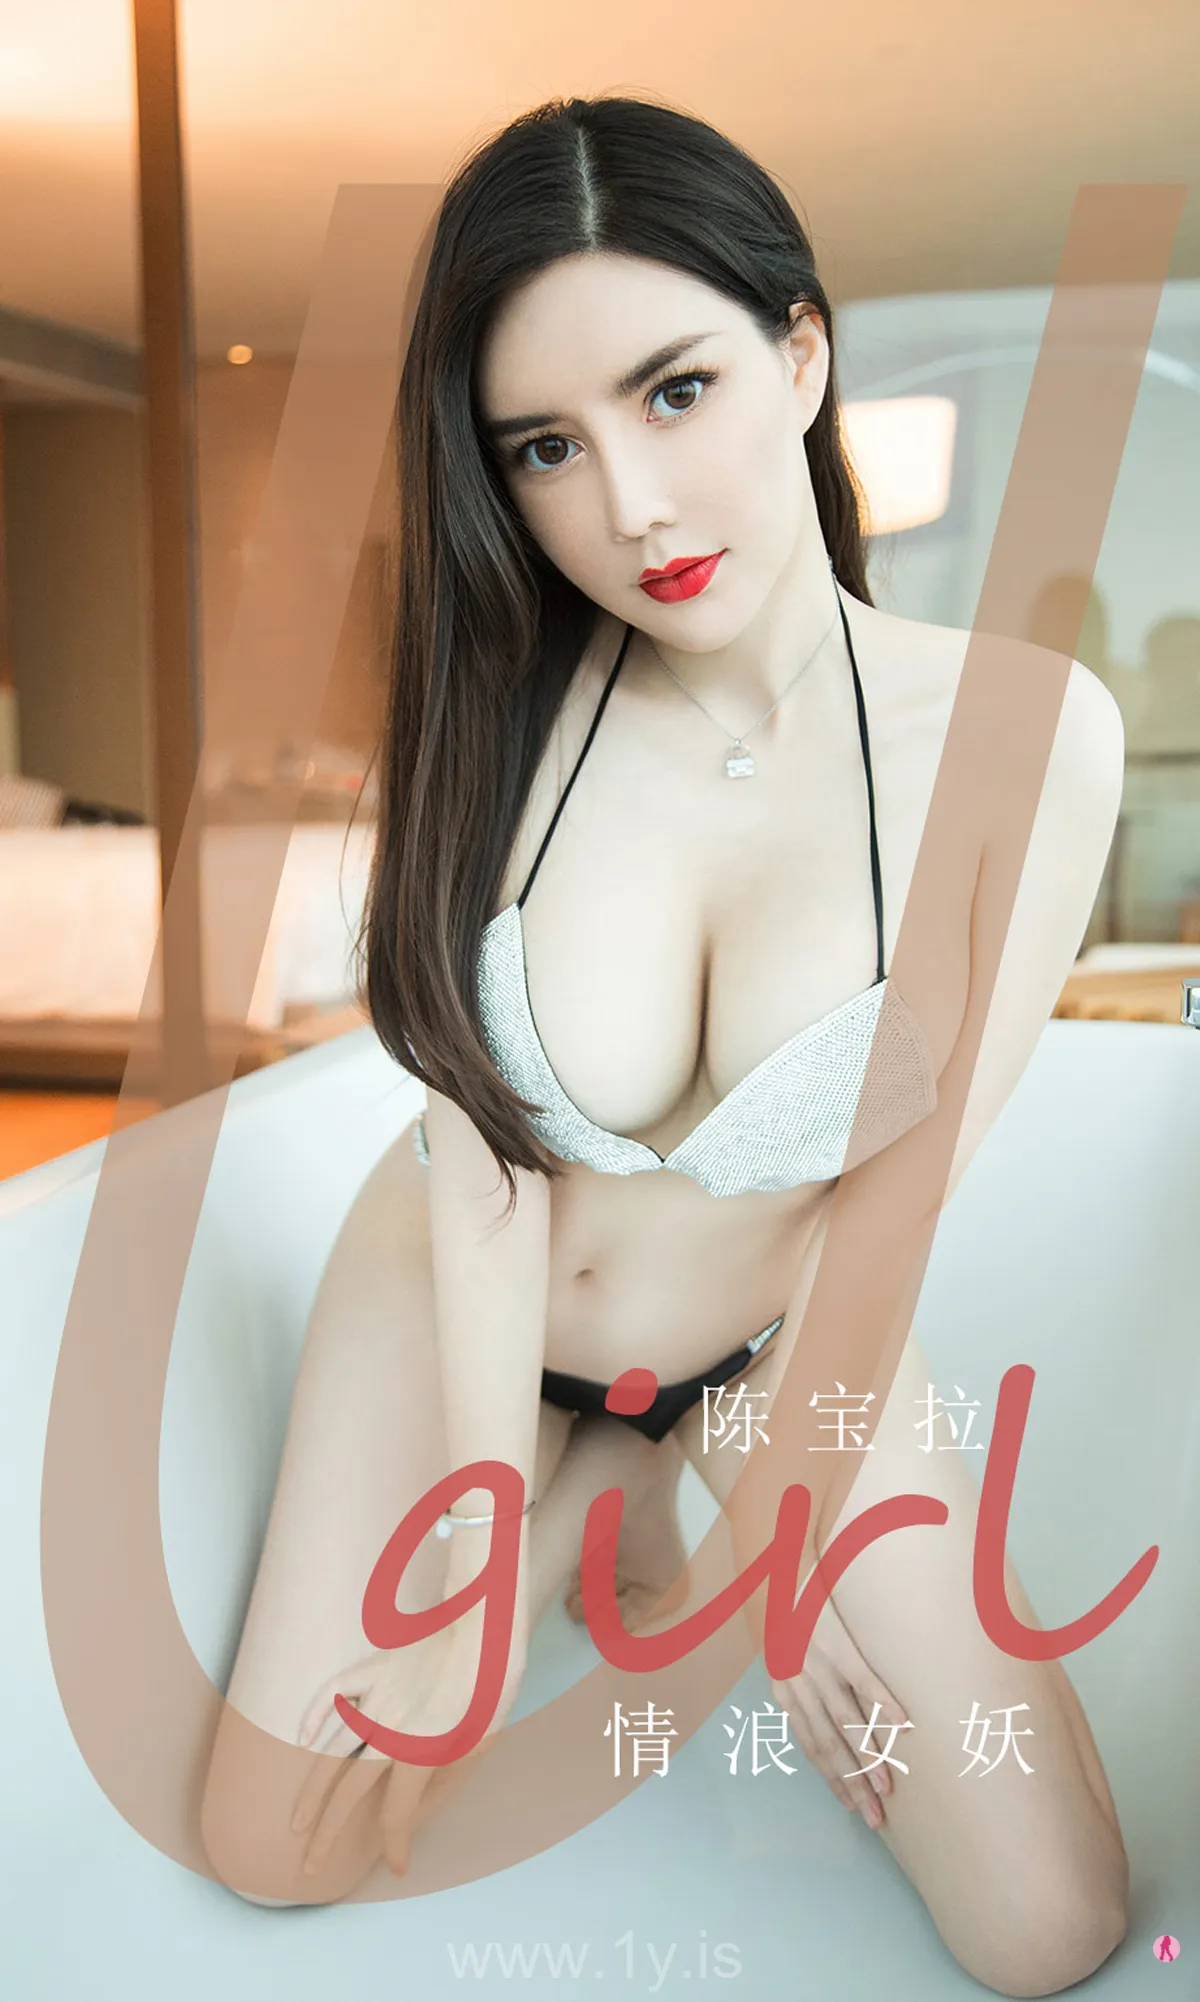 UGIRLS NO.1970 Well Done & Good-looking Chinese Angel 陈宝拉情浪女妖